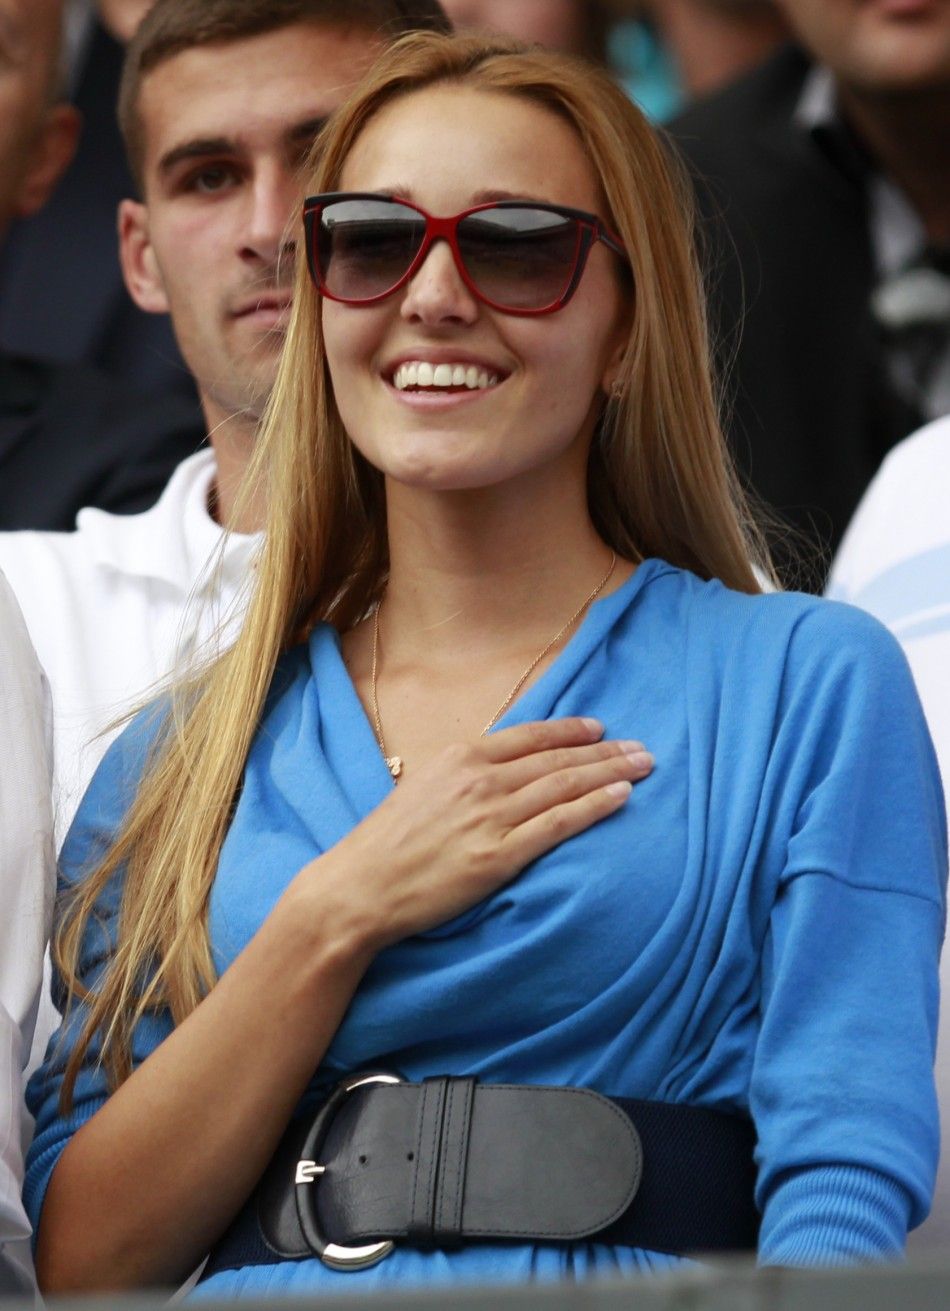 Jelena Ristic, the girlfiend of Novak Djokovic of Serbia, reacts after Djokovic defeated Rafael Nadal of Spain in the men039s singles final match at the Wimbledon tennis championships in London